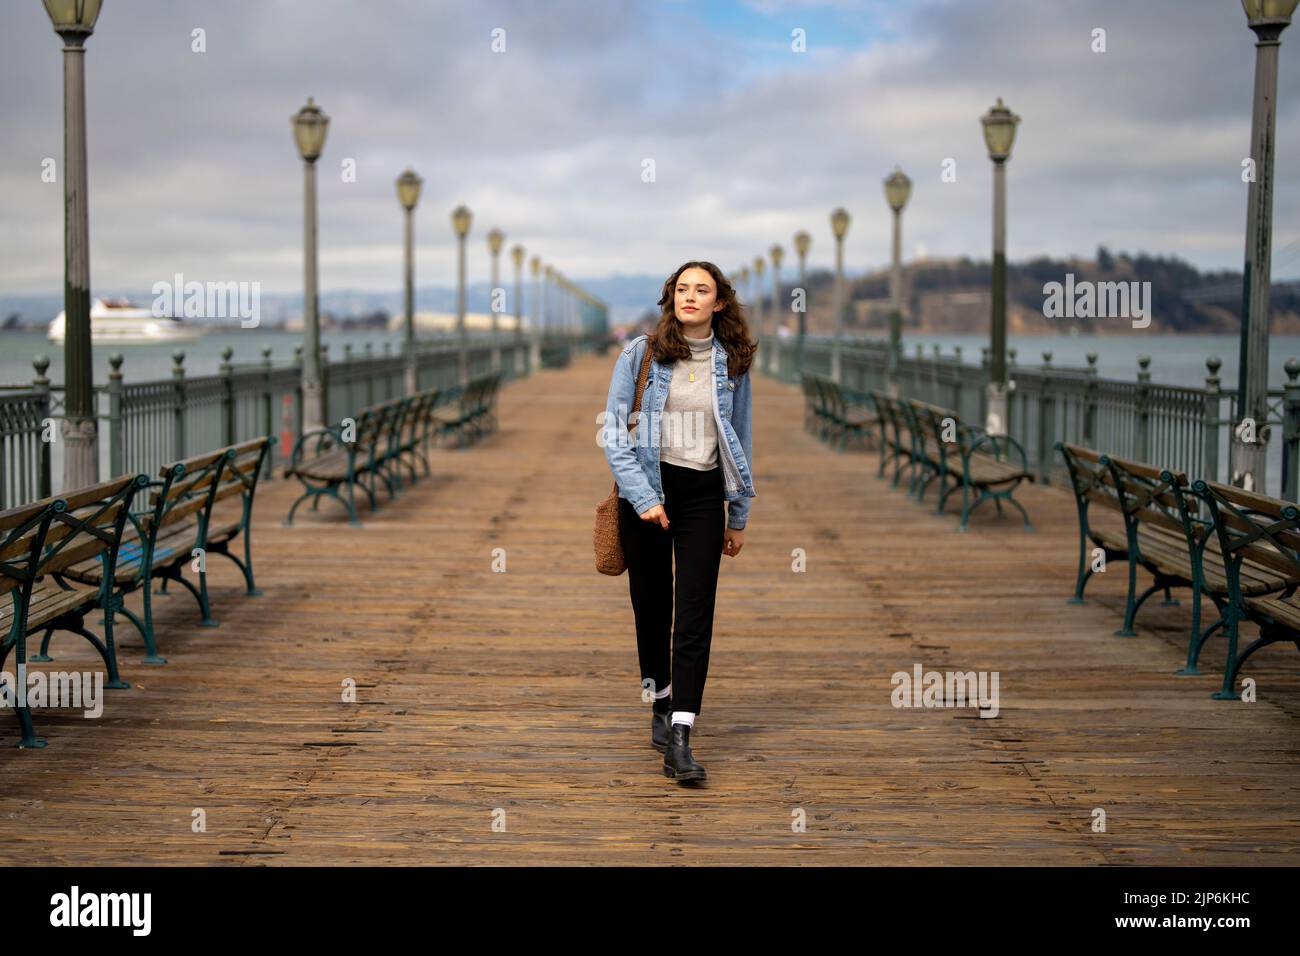 Unbeposed Portrait of Young Woman on Pier 7 Walking towards Camera with San Francisco Bay in the Background Stockfoto